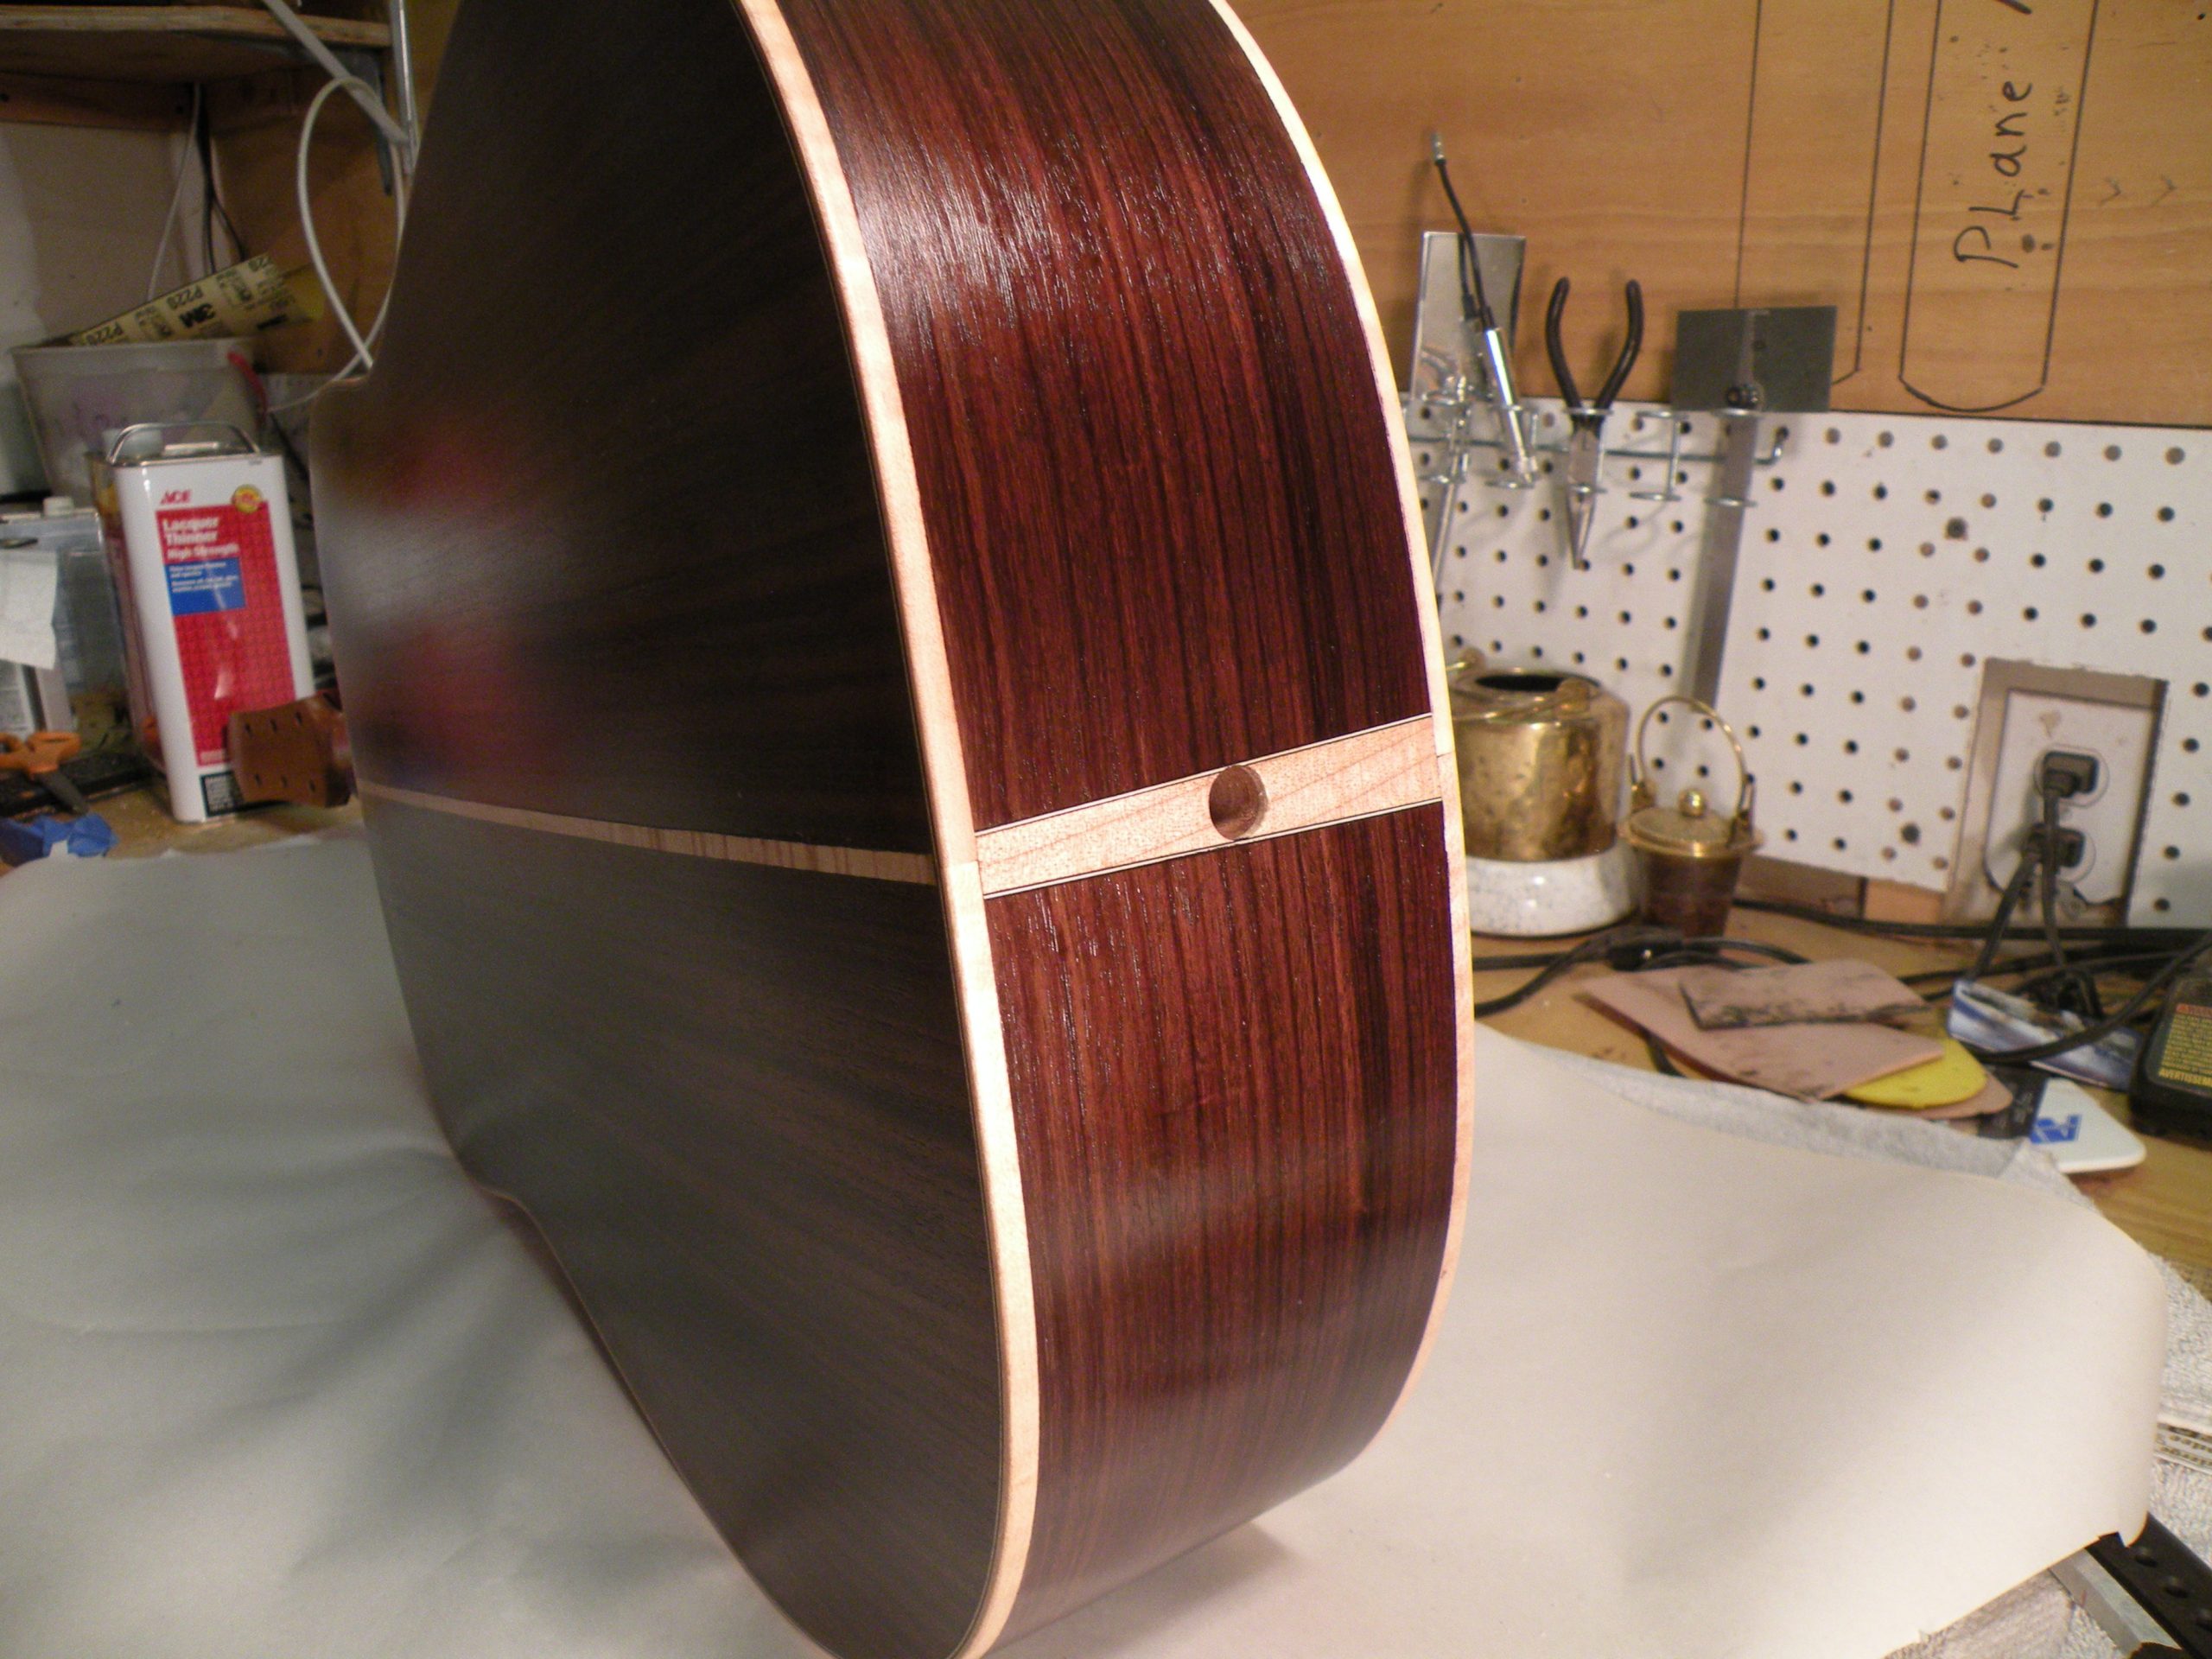 Figured Maple Archtop